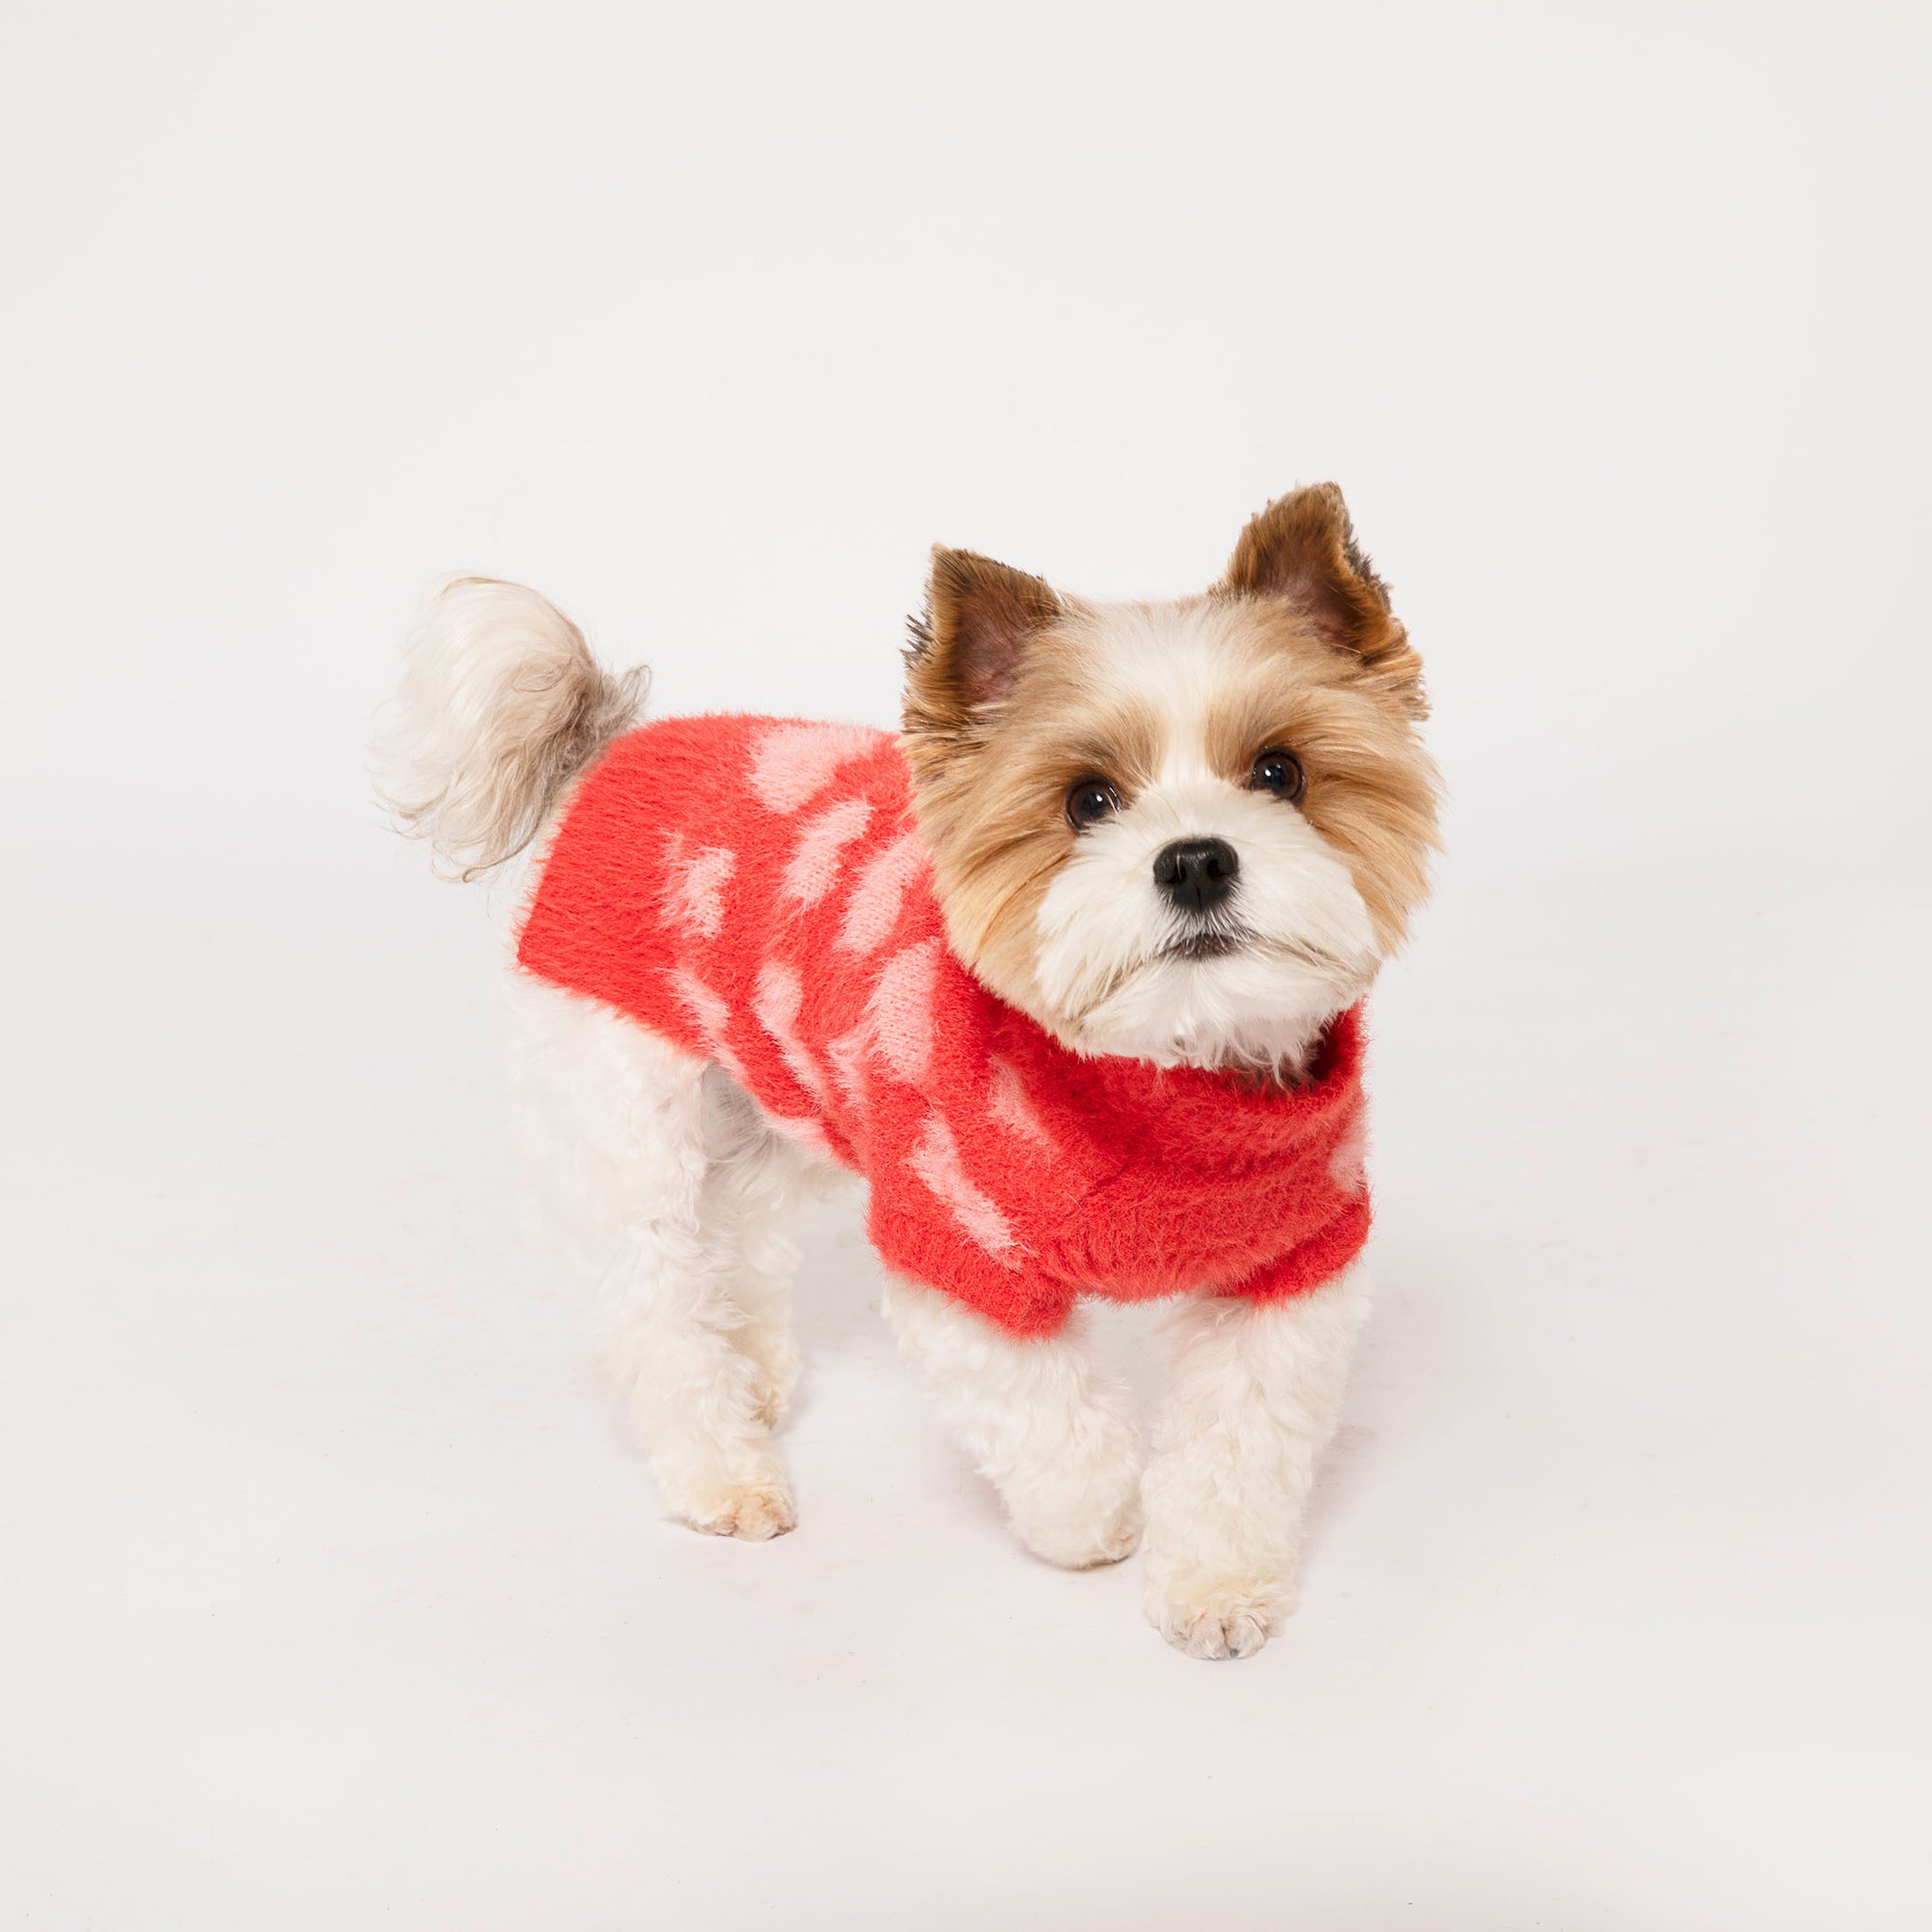 Confident Yorkshire Terrier mix in a red sweater with pink hearts, standing alert and looking at the camera, against a bright white background.